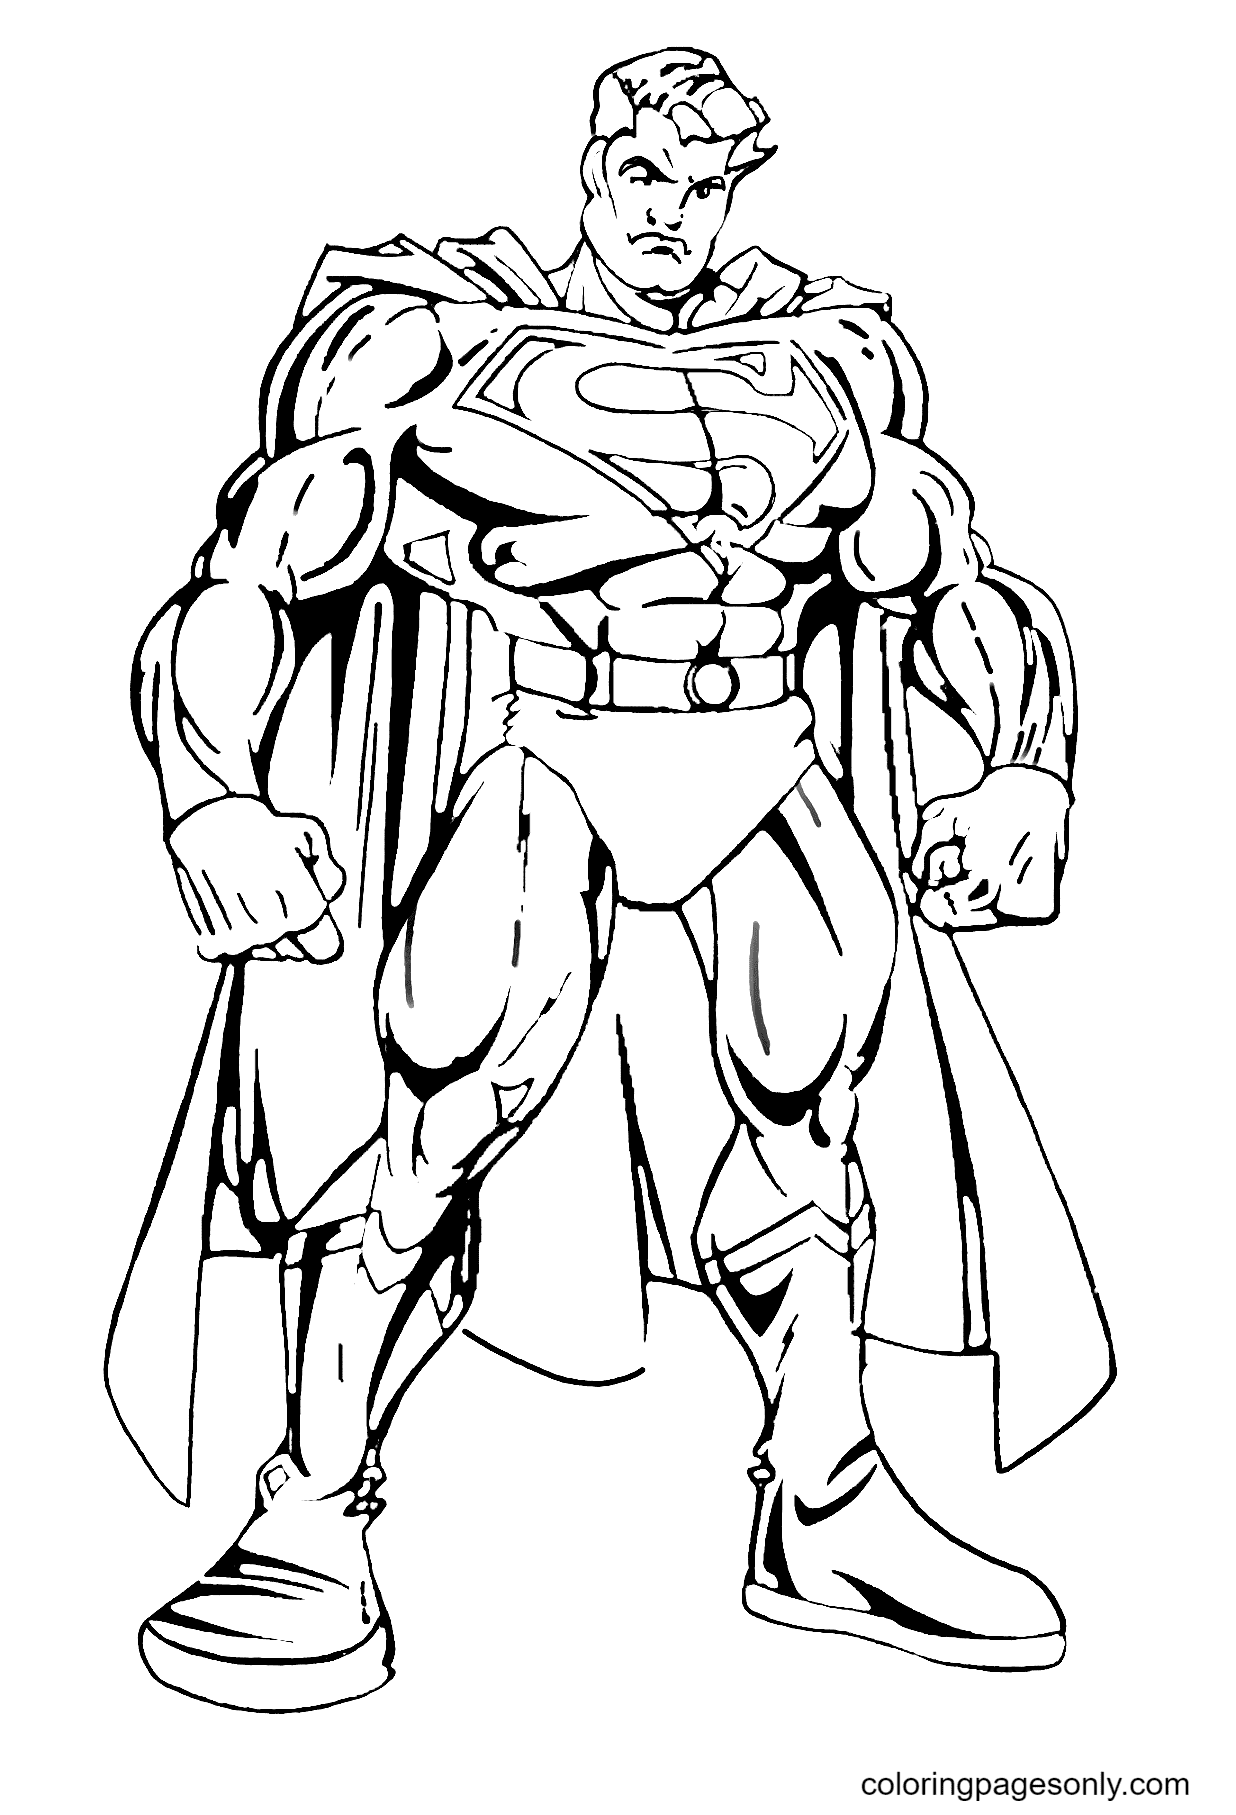 Superman Image Coloring Page